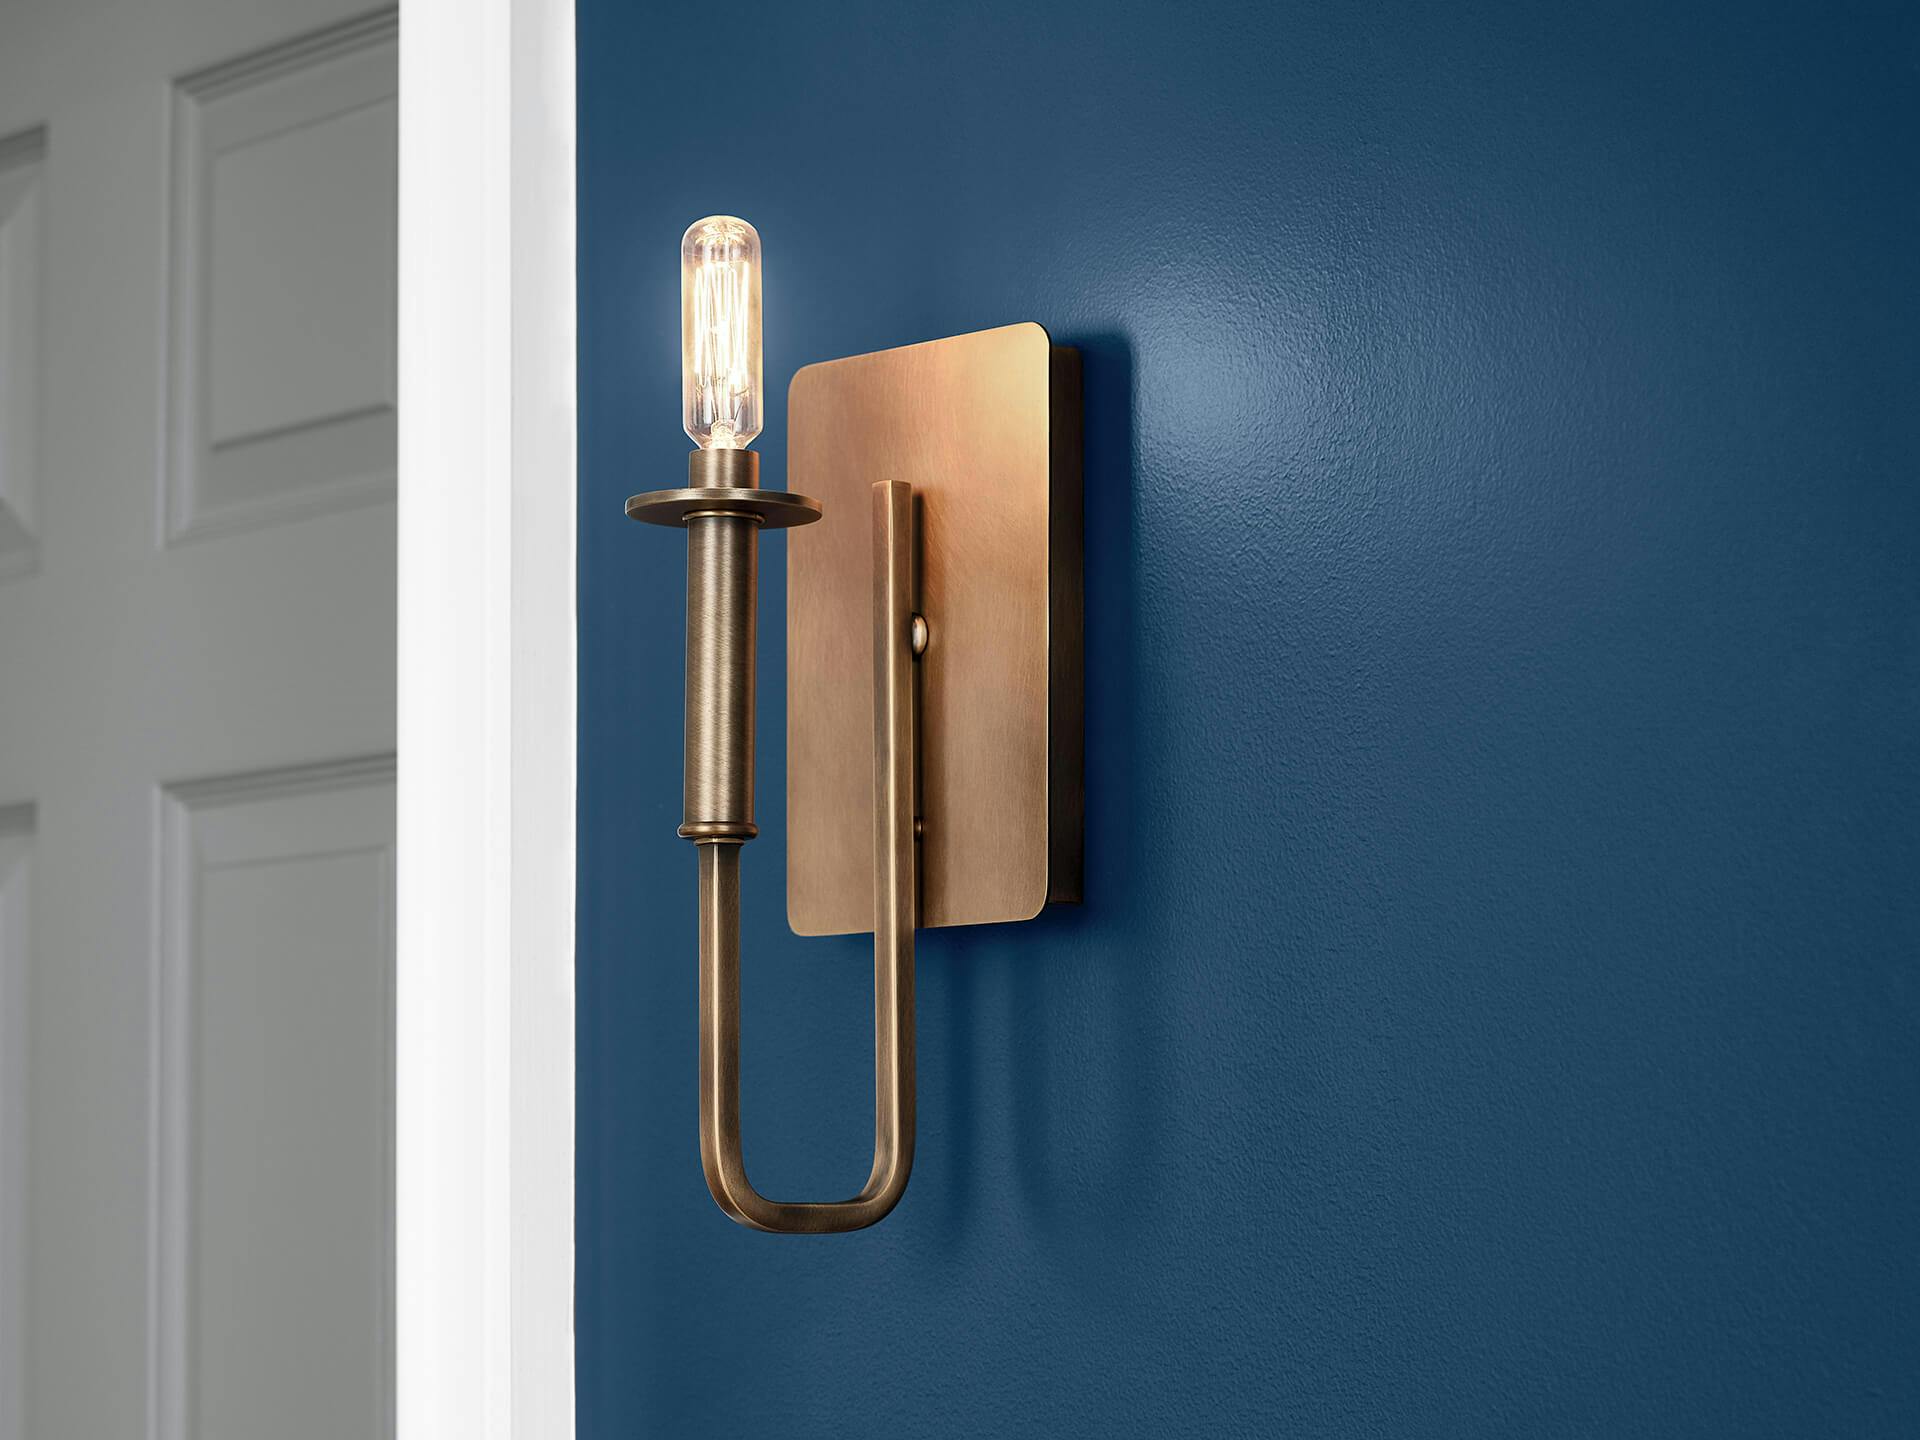 Close up of a brass alden sconce with light bulb on a blue painted wall